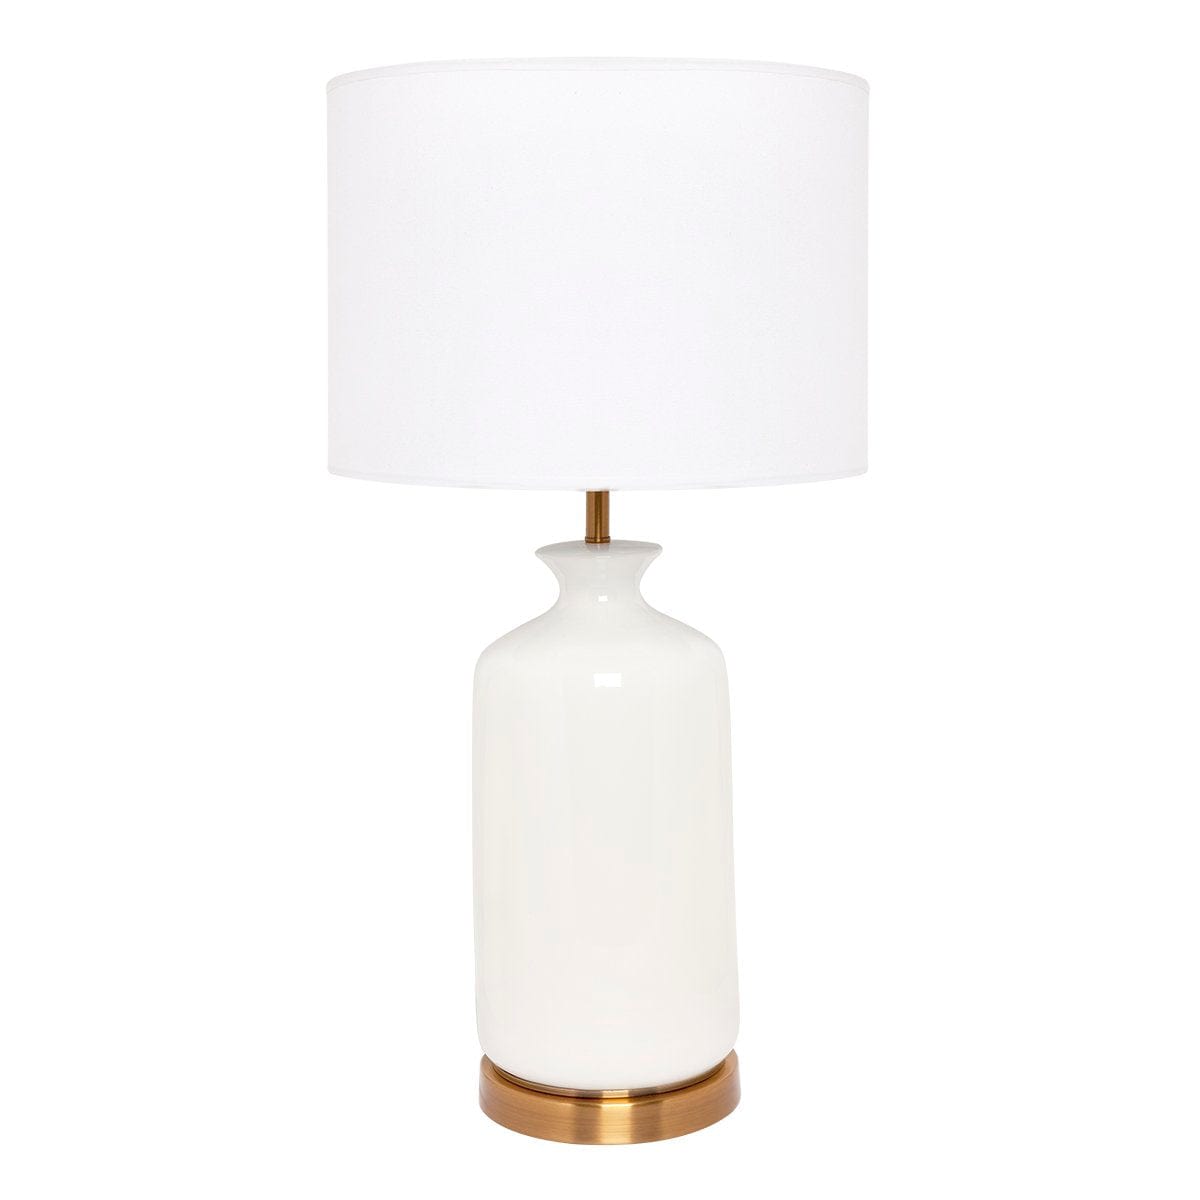 CAFE LIGHTING & LIVING Table Lamp Camille Table Lamp - White 12238